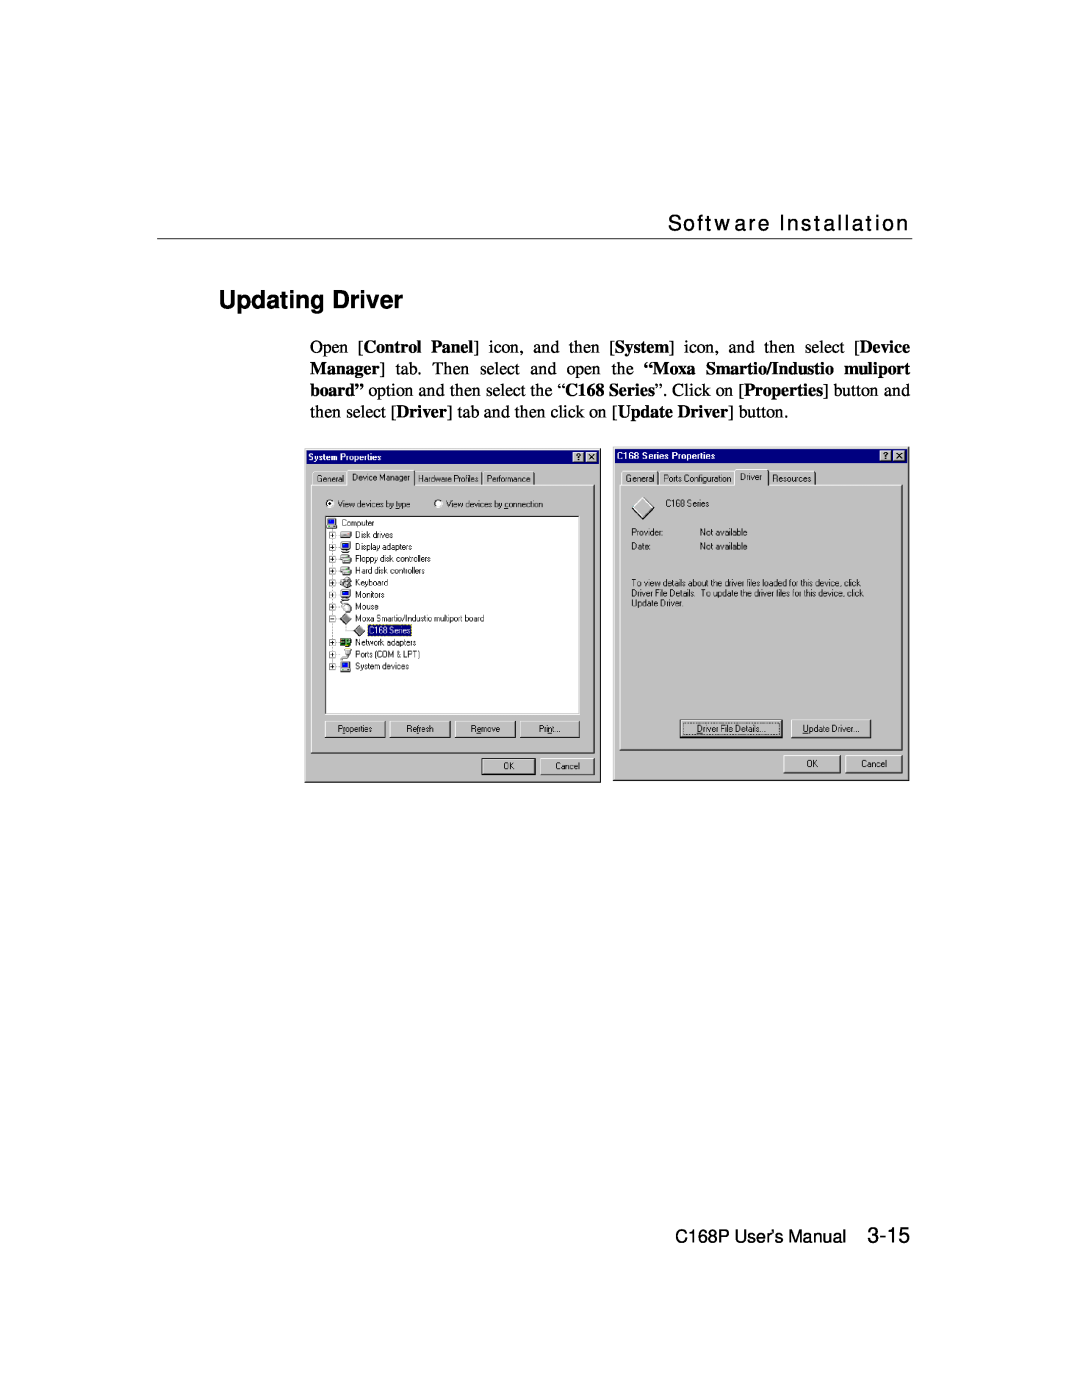 Moxa Technologies user manual Updating Driver, Software Installation, C168P User’s Manual 